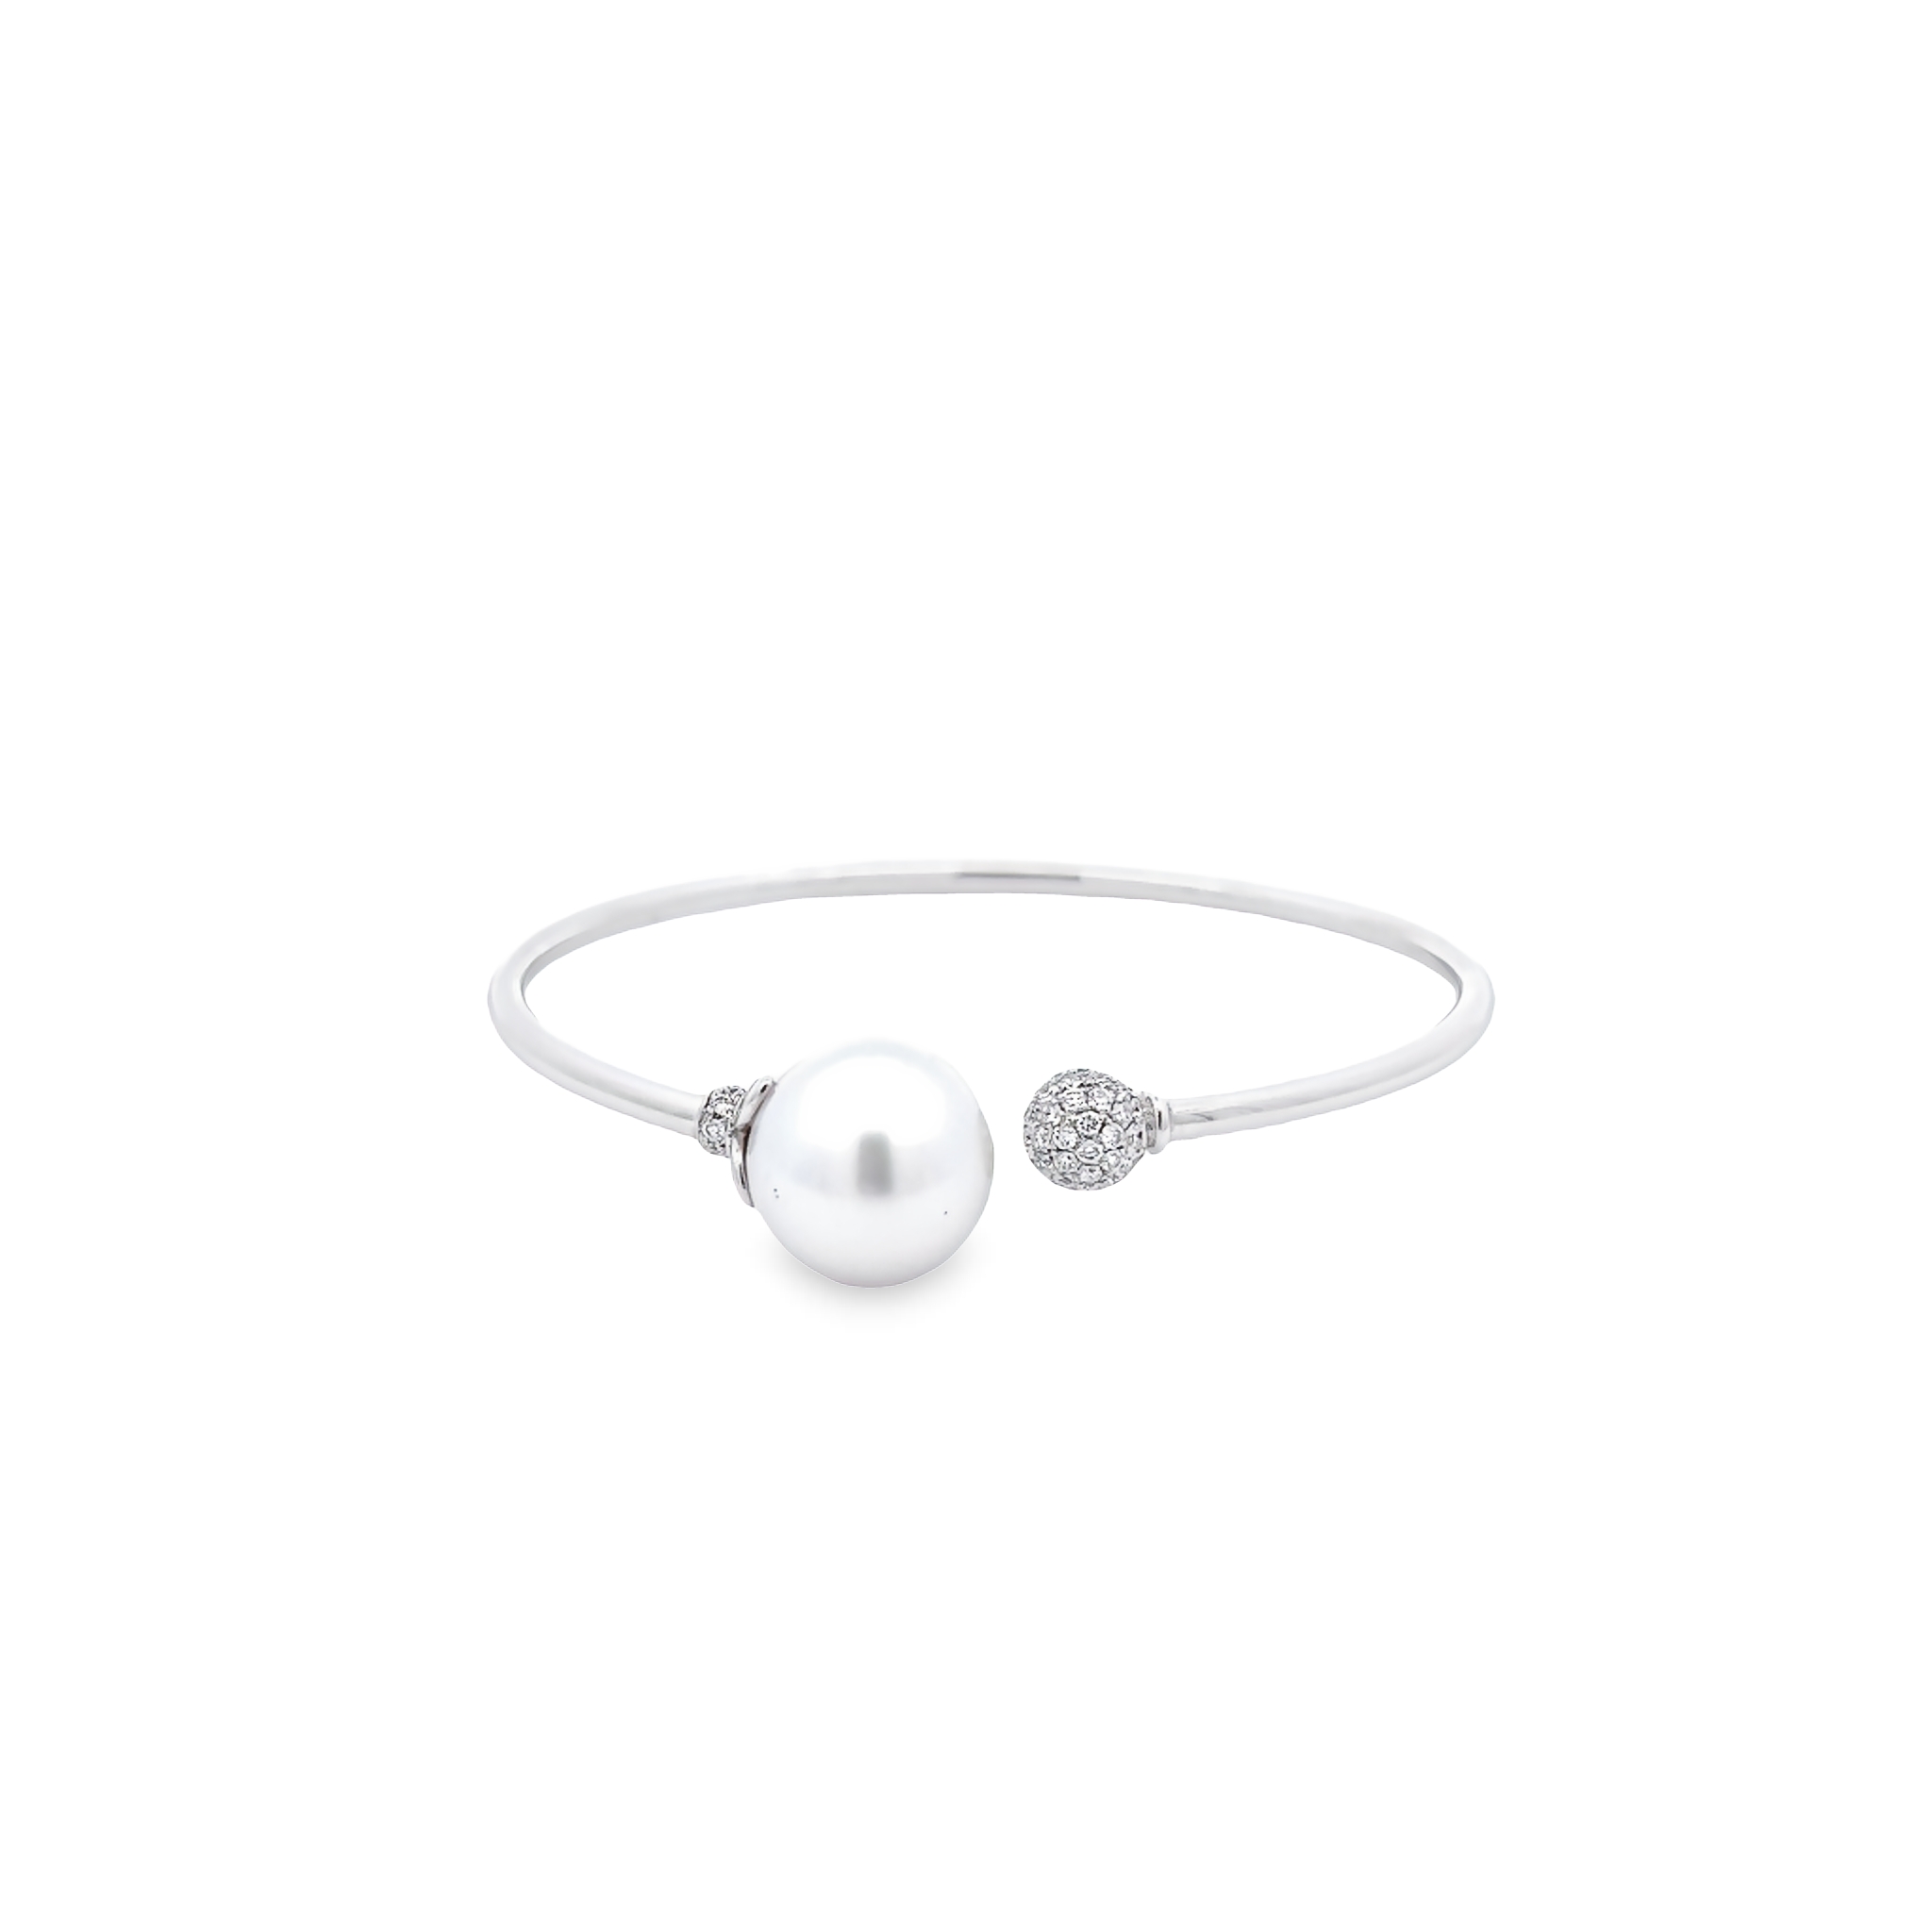 18 Karat white gold open bangle with One 5.0g 12-13mm South Sea Pearl and 50=0.40 total weight round brilliant G SI Diamonds